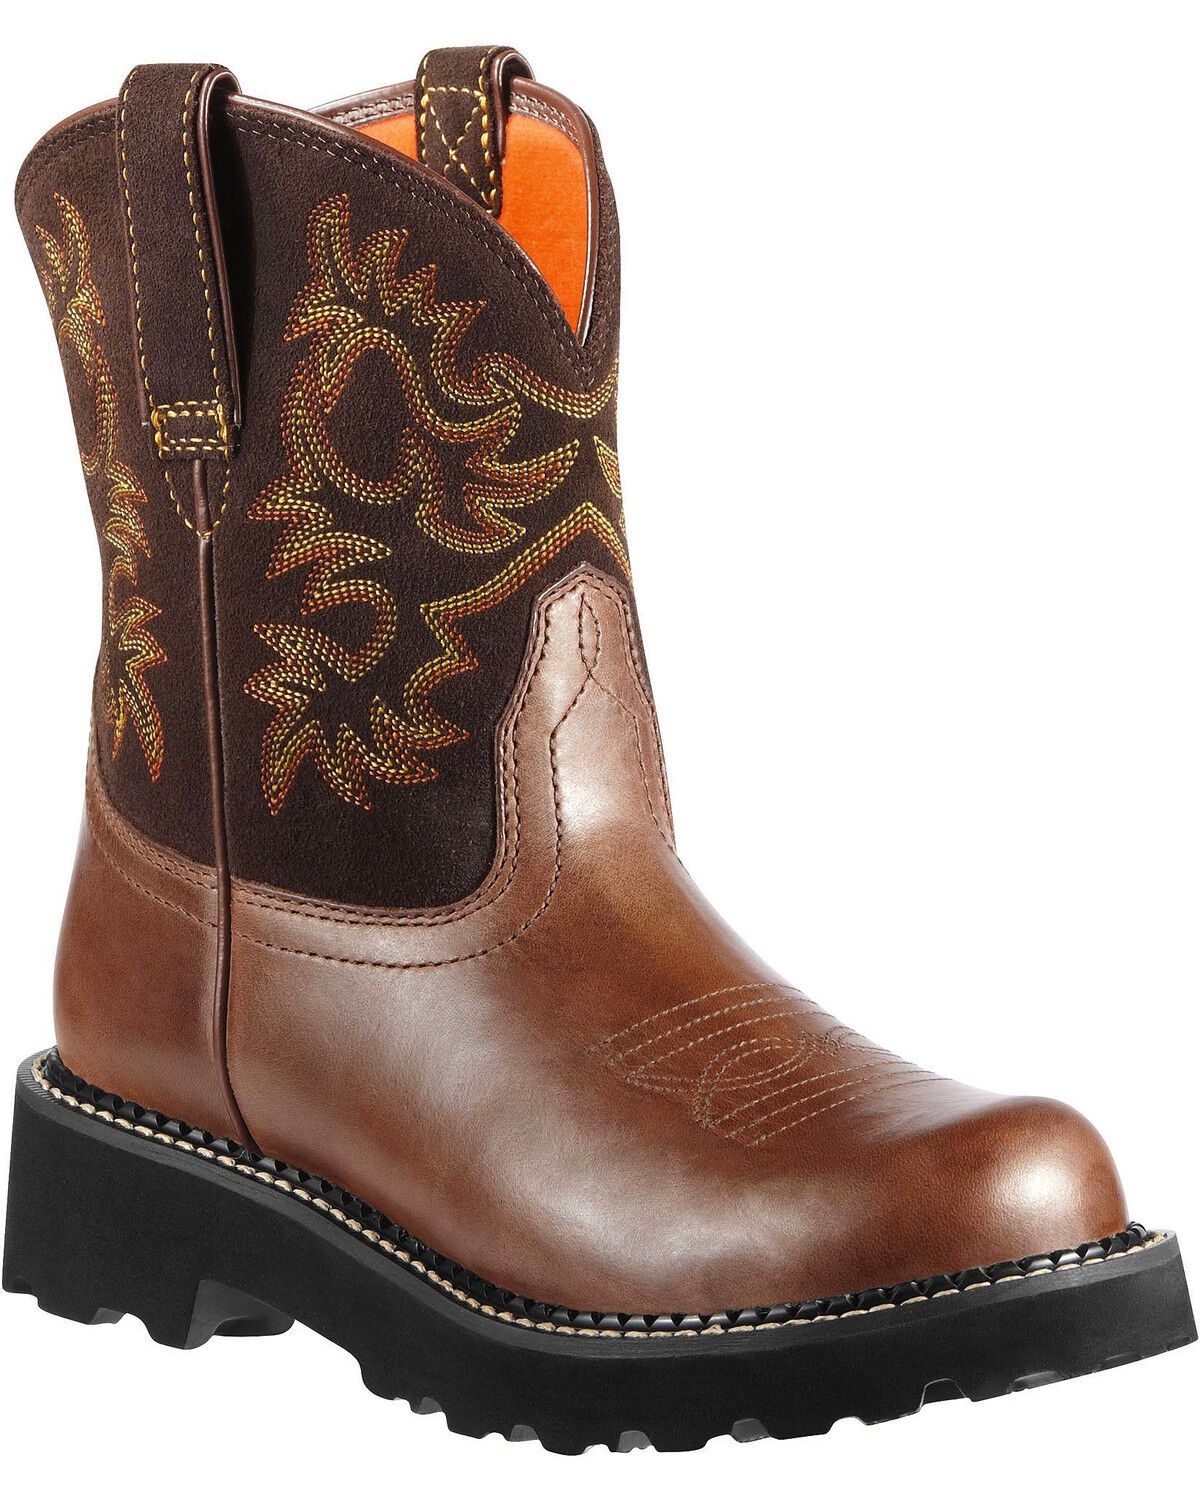 women's ariat fatbaby boots on clearance